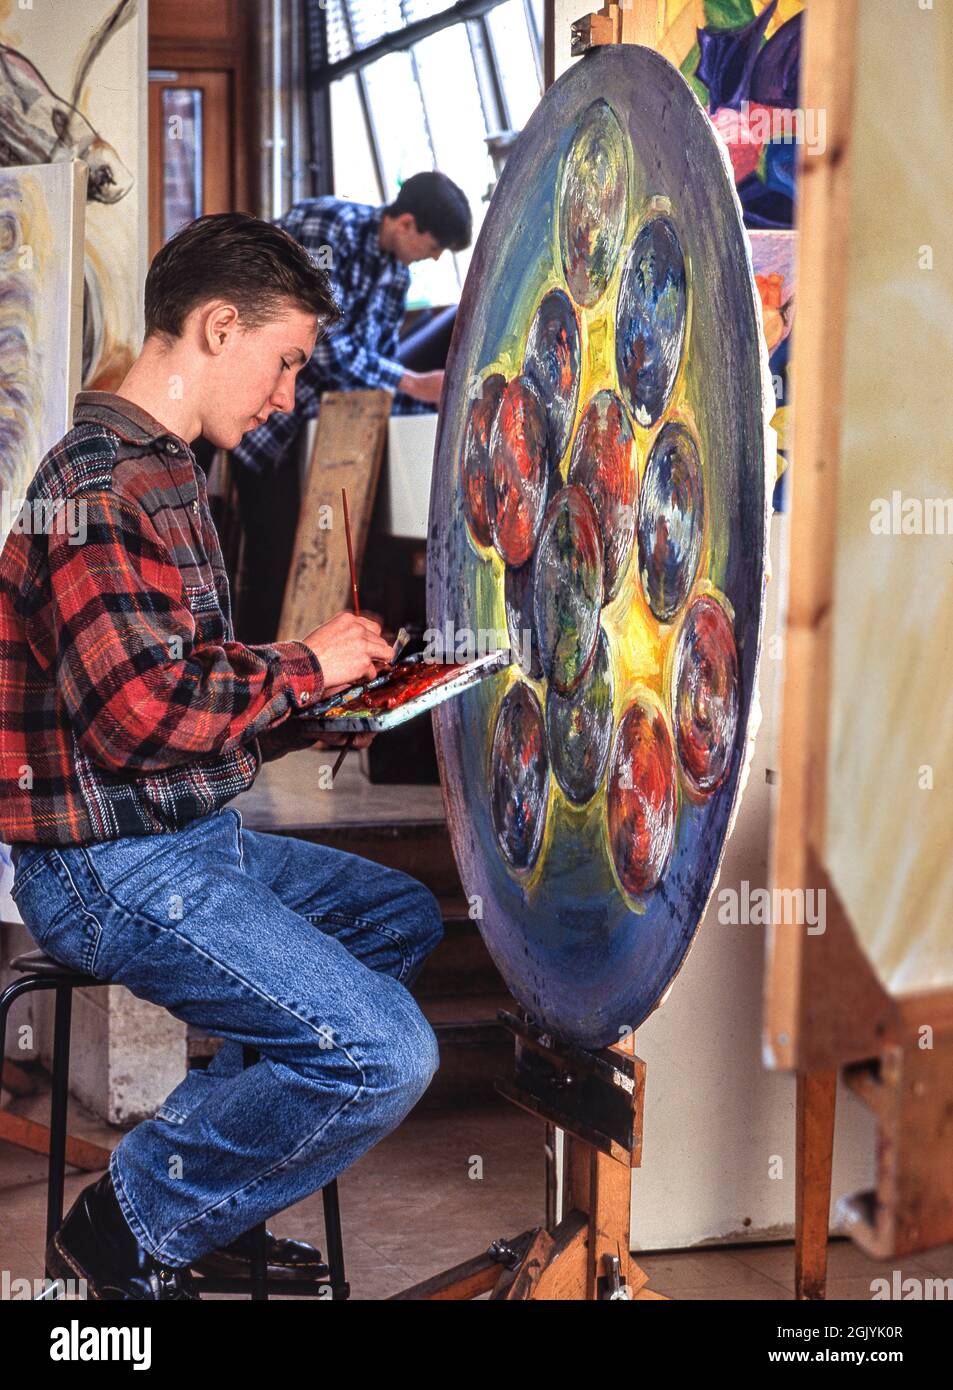 Art class with 15-17years senior secondary upper school boy student  pupil putting finishing touches to his expressive modern circular artwork painted in oils Stock Photo